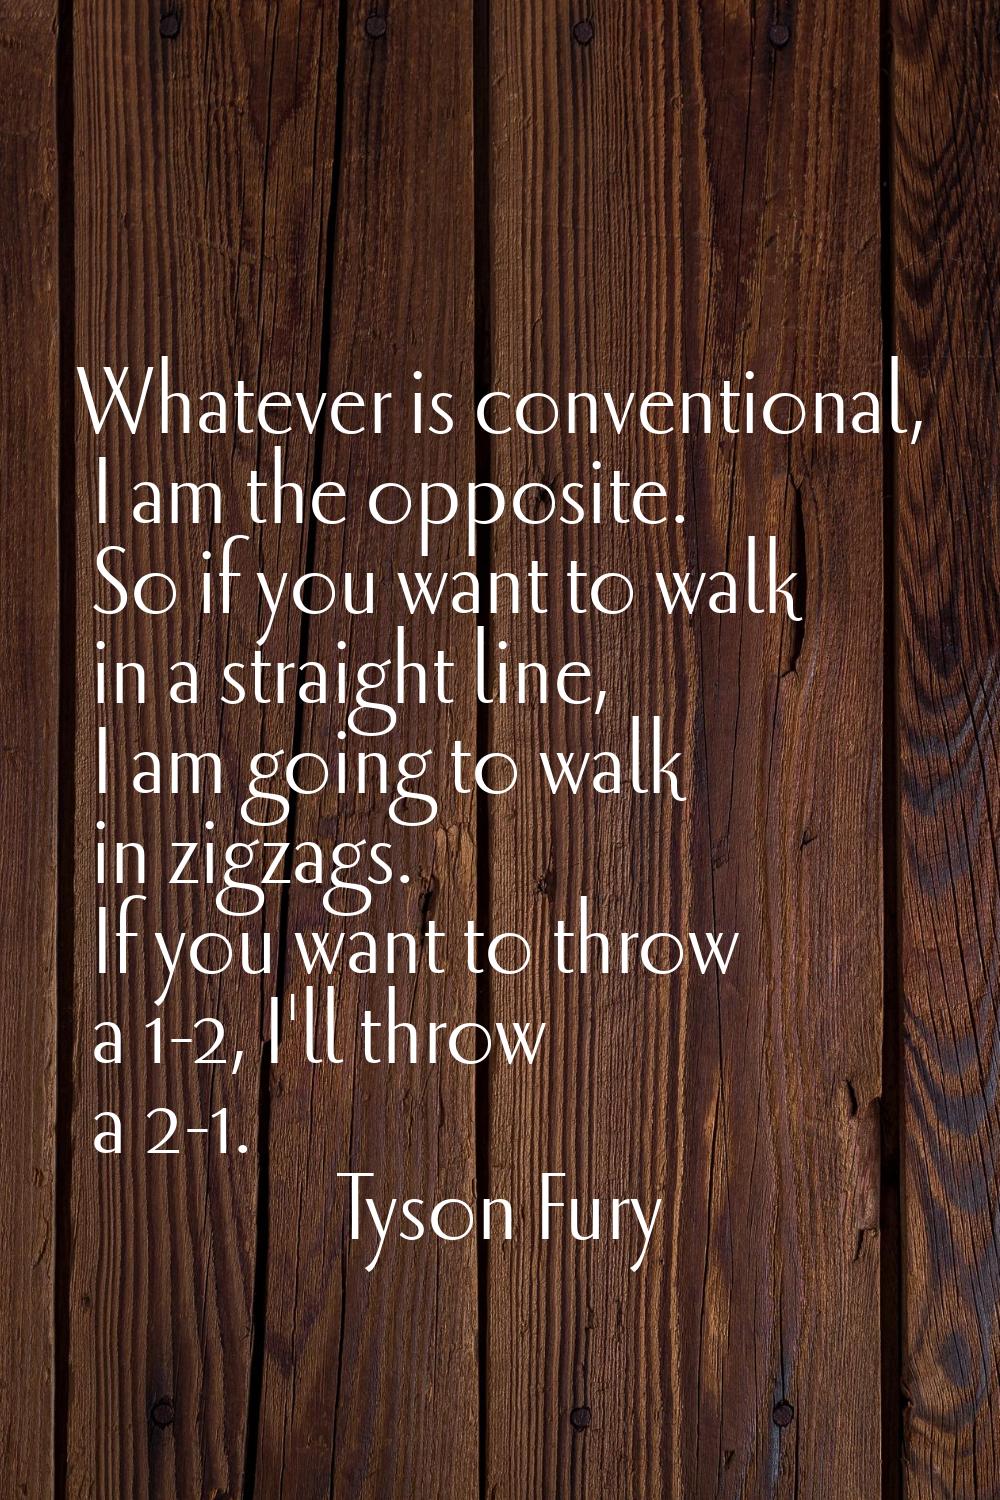 Whatever is conventional, I am the opposite. So if you want to walk in a straight line, I am going 